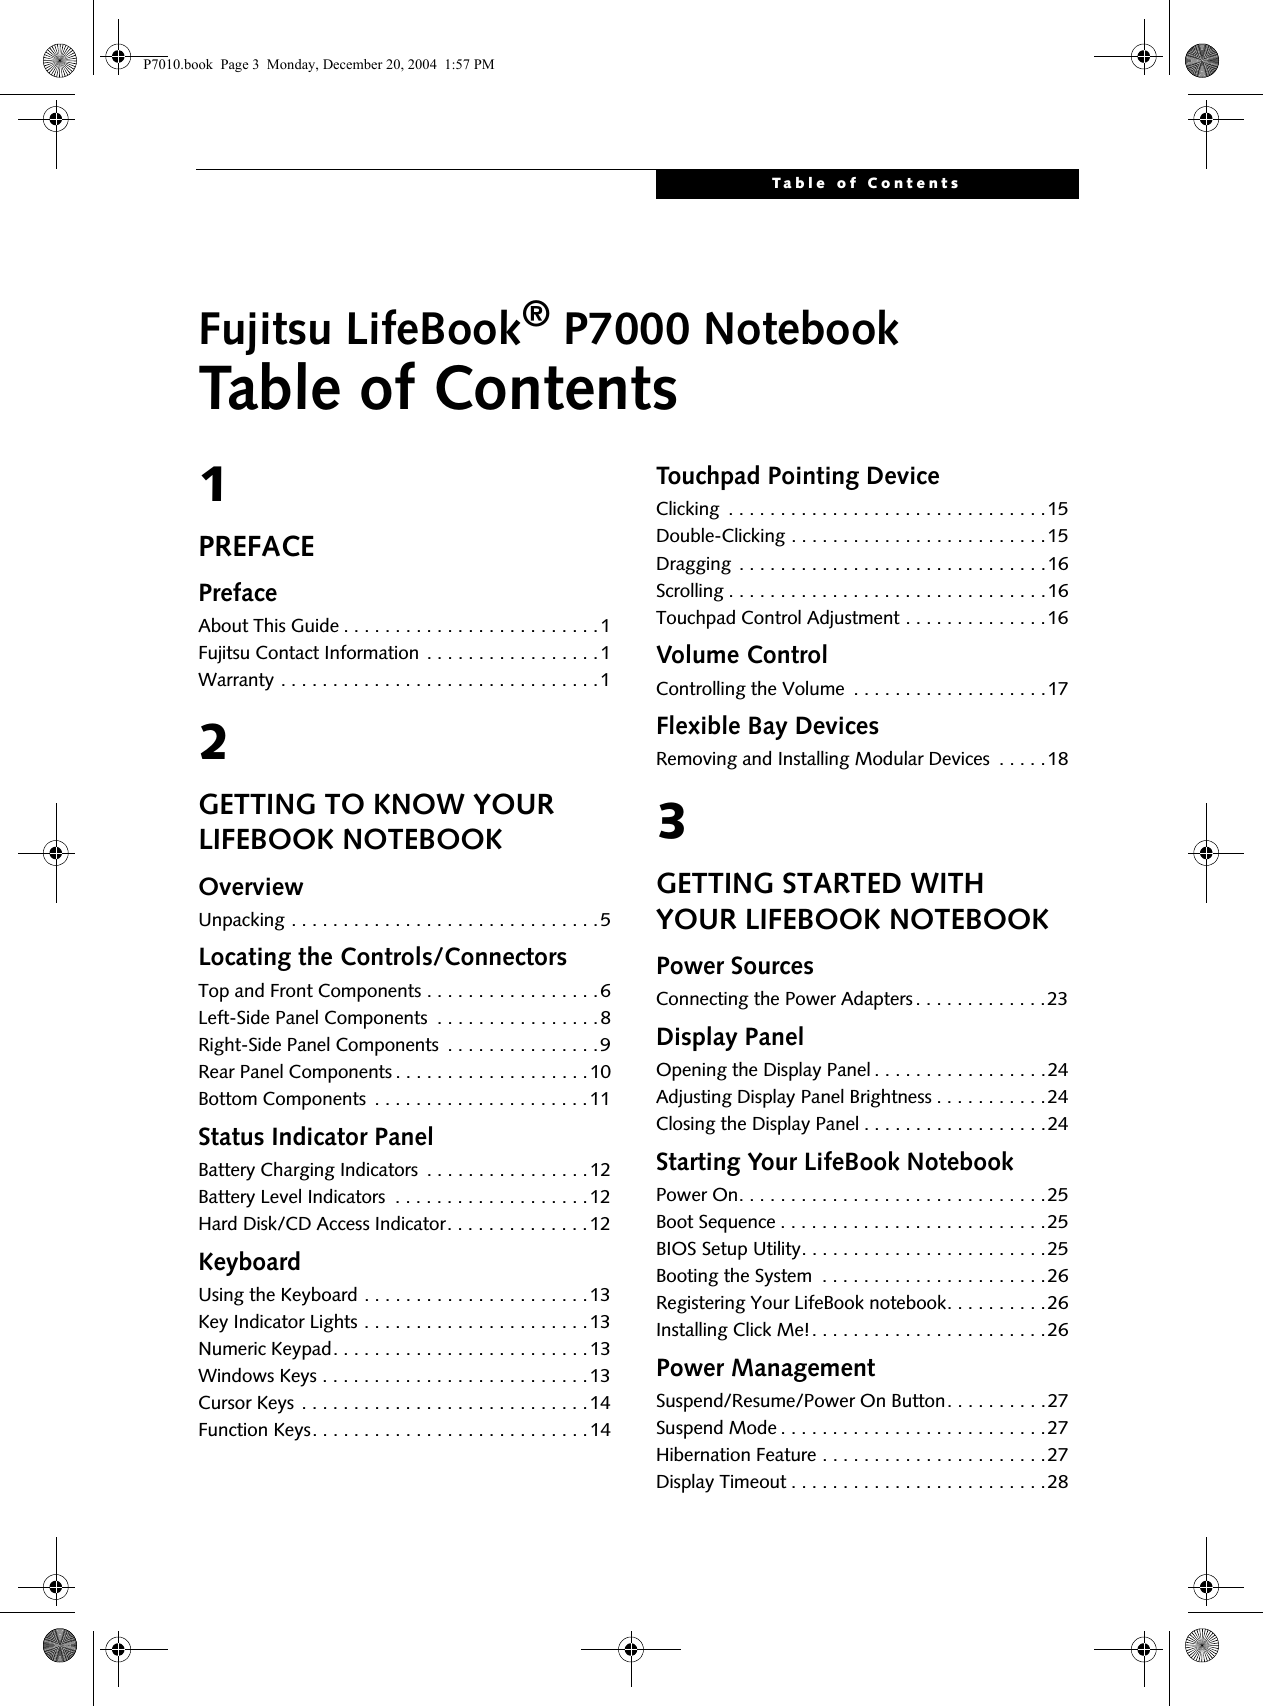 Table of ContentsFujitsu LifeBook® P7000 NotebookTable of Contents1PREFACEPrefaceAbout This Guide . . . . . . . . . . . . . . . . . . . . . . . . .1Fujitsu Contact Information . . . . . . . . . . . . . . . . .1Warranty . . . . . . . . . . . . . . . . . . . . . . . . . . . . . . .12GETTING TO KNOW YOUR LIFEBOOK NOTEBOOKOverviewUnpacking . . . . . . . . . . . . . . . . . . . . . . . . . . . . . .5Locating the Controls/ConnectorsTop and Front Components . . . . . . . . . . . . . . . . .6Left-Side Panel Components  . . . . . . . . . . . . . . . .8Right-Side Panel Components  . . . . . . . . . . . . . . .9Rear Panel Components . . . . . . . . . . . . . . . . . . .10Bottom Components  . . . . . . . . . . . . . . . . . . . . .11Status Indicator PanelBattery Charging Indicators  . . . . . . . . . . . . . . . .12Battery Level Indicators  . . . . . . . . . . . . . . . . . . .12Hard Disk/CD Access Indicator. . . . . . . . . . . . . .12KeyboardUsing the Keyboard . . . . . . . . . . . . . . . . . . . . . .13Key Indicator Lights . . . . . . . . . . . . . . . . . . . . . .13Numeric Keypad. . . . . . . . . . . . . . . . . . . . . . . . .13Windows Keys . . . . . . . . . . . . . . . . . . . . . . . . . .13Cursor Keys . . . . . . . . . . . . . . . . . . . . . . . . . . . .14Function Keys. . . . . . . . . . . . . . . . . . . . . . . . . . .14Touchpad Pointing DeviceClicking  . . . . . . . . . . . . . . . . . . . . . . . . . . . . . . .15Double-Clicking . . . . . . . . . . . . . . . . . . . . . . . . .15Dragging  . . . . . . . . . . . . . . . . . . . . . . . . . . . . . .16Scrolling . . . . . . . . . . . . . . . . . . . . . . . . . . . . . . .16Touchpad Control Adjustment . . . . . . . . . . . . . .16Volume ControlControlling the Volume  . . . . . . . . . . . . . . . . . . .17Flexible Bay DevicesRemoving and Installing Modular Devices  . . . . .183GETTING STARTED WITH YOUR LIFEBOOK NOTEBOOKPower SourcesConnecting the Power Adapters . . . . . . . . . . . . .23Display PanelOpening the Display Panel . . . . . . . . . . . . . . . . .24Adjusting Display Panel Brightness . . . . . . . . . . .24Closing the Display Panel . . . . . . . . . . . . . . . . . .24Starting Your LifeBook NotebookPower On. . . . . . . . . . . . . . . . . . . . . . . . . . . . . .25Boot Sequence . . . . . . . . . . . . . . . . . . . . . . . . . .25BIOS Setup Utility. . . . . . . . . . . . . . . . . . . . . . . .25Booting the System  . . . . . . . . . . . . . . . . . . . . . .26Registering Your LifeBook notebook. . . . . . . . . .26Installing Click Me!. . . . . . . . . . . . . . . . . . . . . . .26Power ManagementSuspend/Resume/Power On Button. . . . . . . . . .27Suspend Mode . . . . . . . . . . . . . . . . . . . . . . . . . .27Hibernation Feature . . . . . . . . . . . . . . . . . . . . . .27Display Timeout . . . . . . . . . . . . . . . . . . . . . . . . .28P7010.book  Page 3  Monday, December 20, 2004  1:57 PM